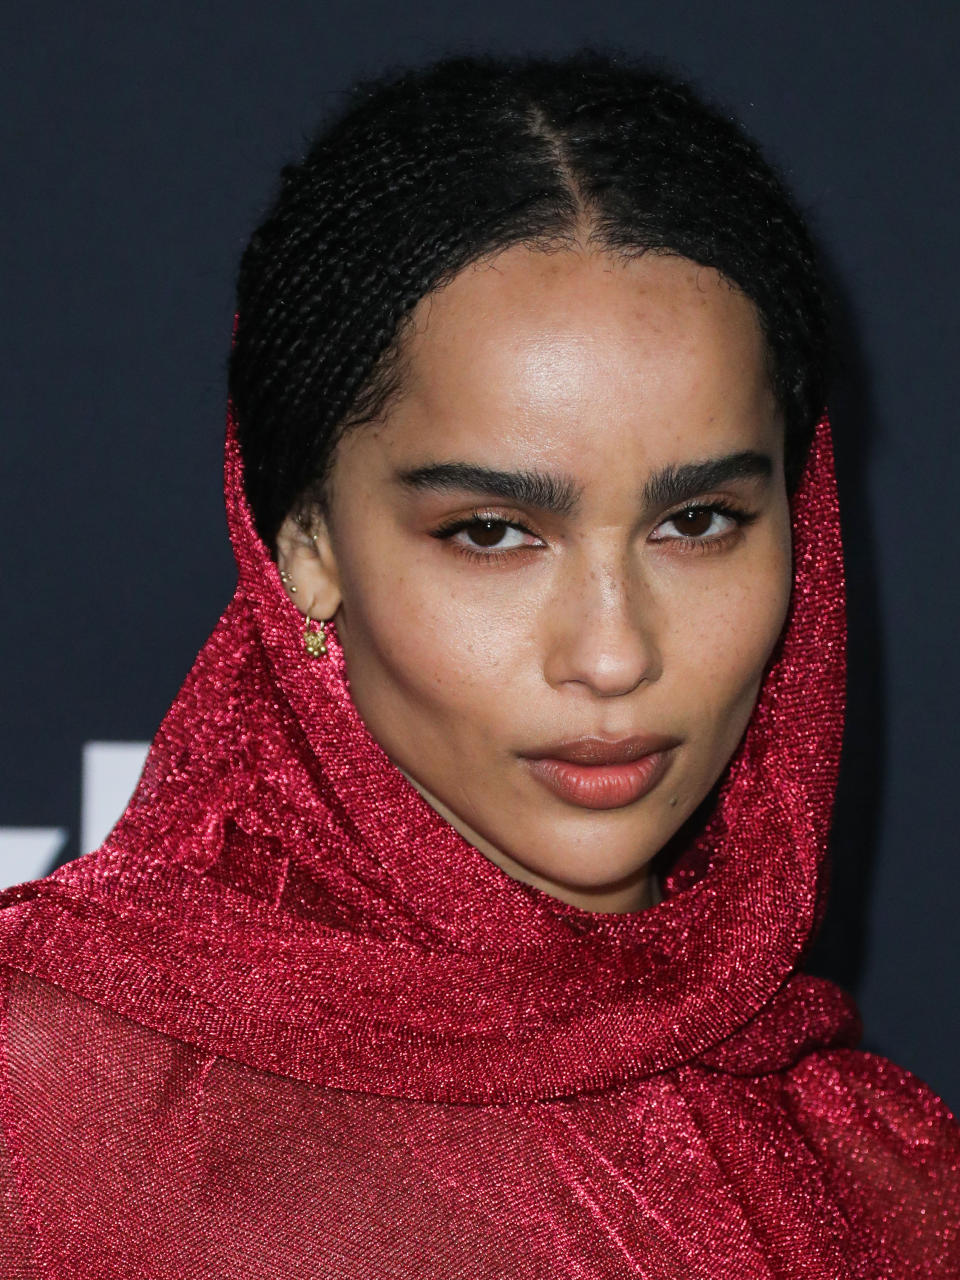 LOS ANGELES, CALIFORNIA, USA - NOVEMBER 15: Actress Zoe Kravitz arrives at the 6th Annual InStyle Awards 2021 held at the Getty Center on November 15, 2021 in Los Angeles, California, United States. (Photo by Xavier Collin/Image Press Agency/Sipa USA)